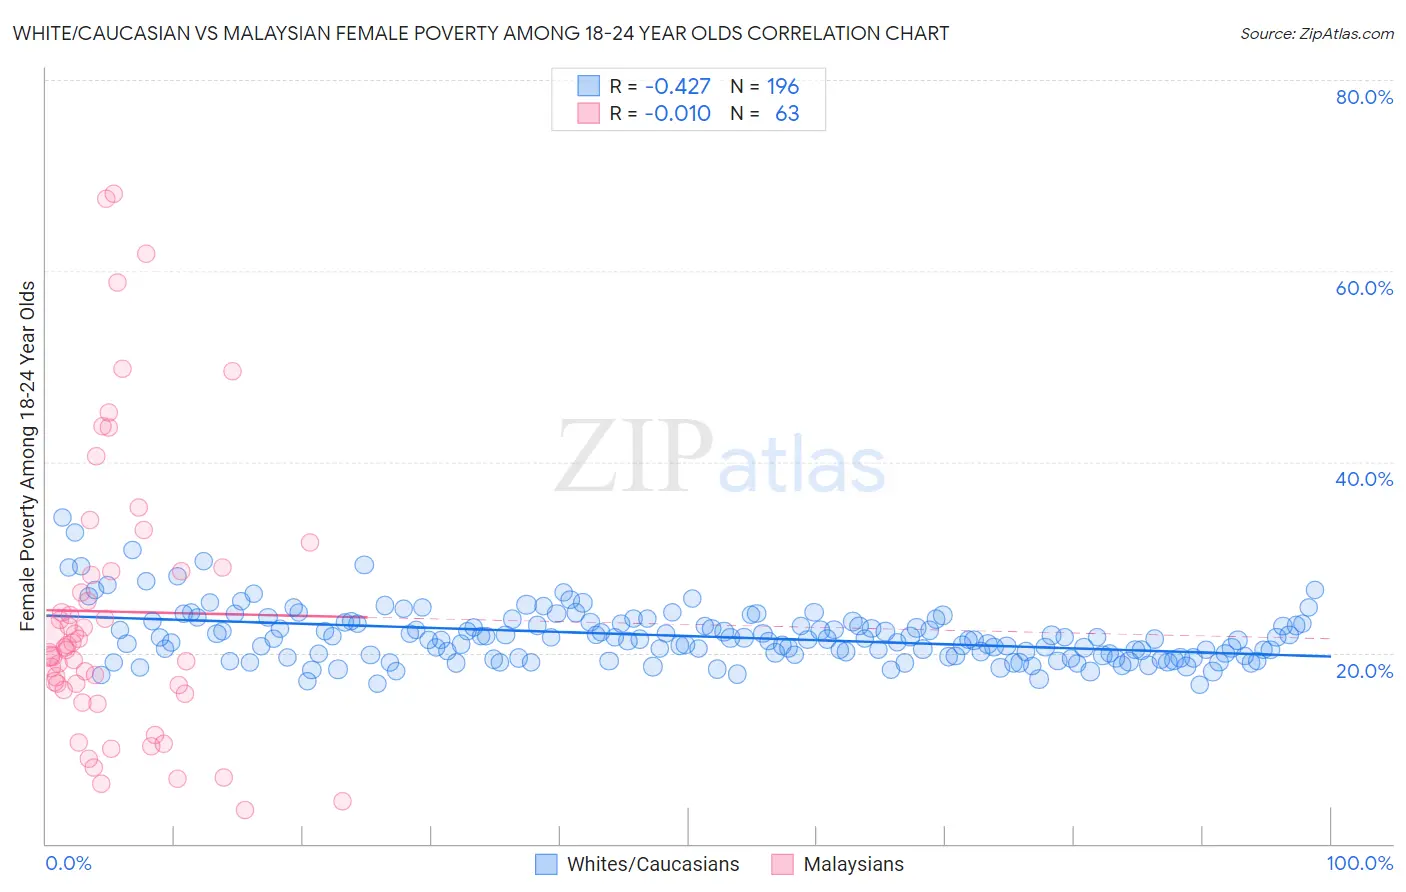 White/Caucasian vs Malaysian Female Poverty Among 18-24 Year Olds